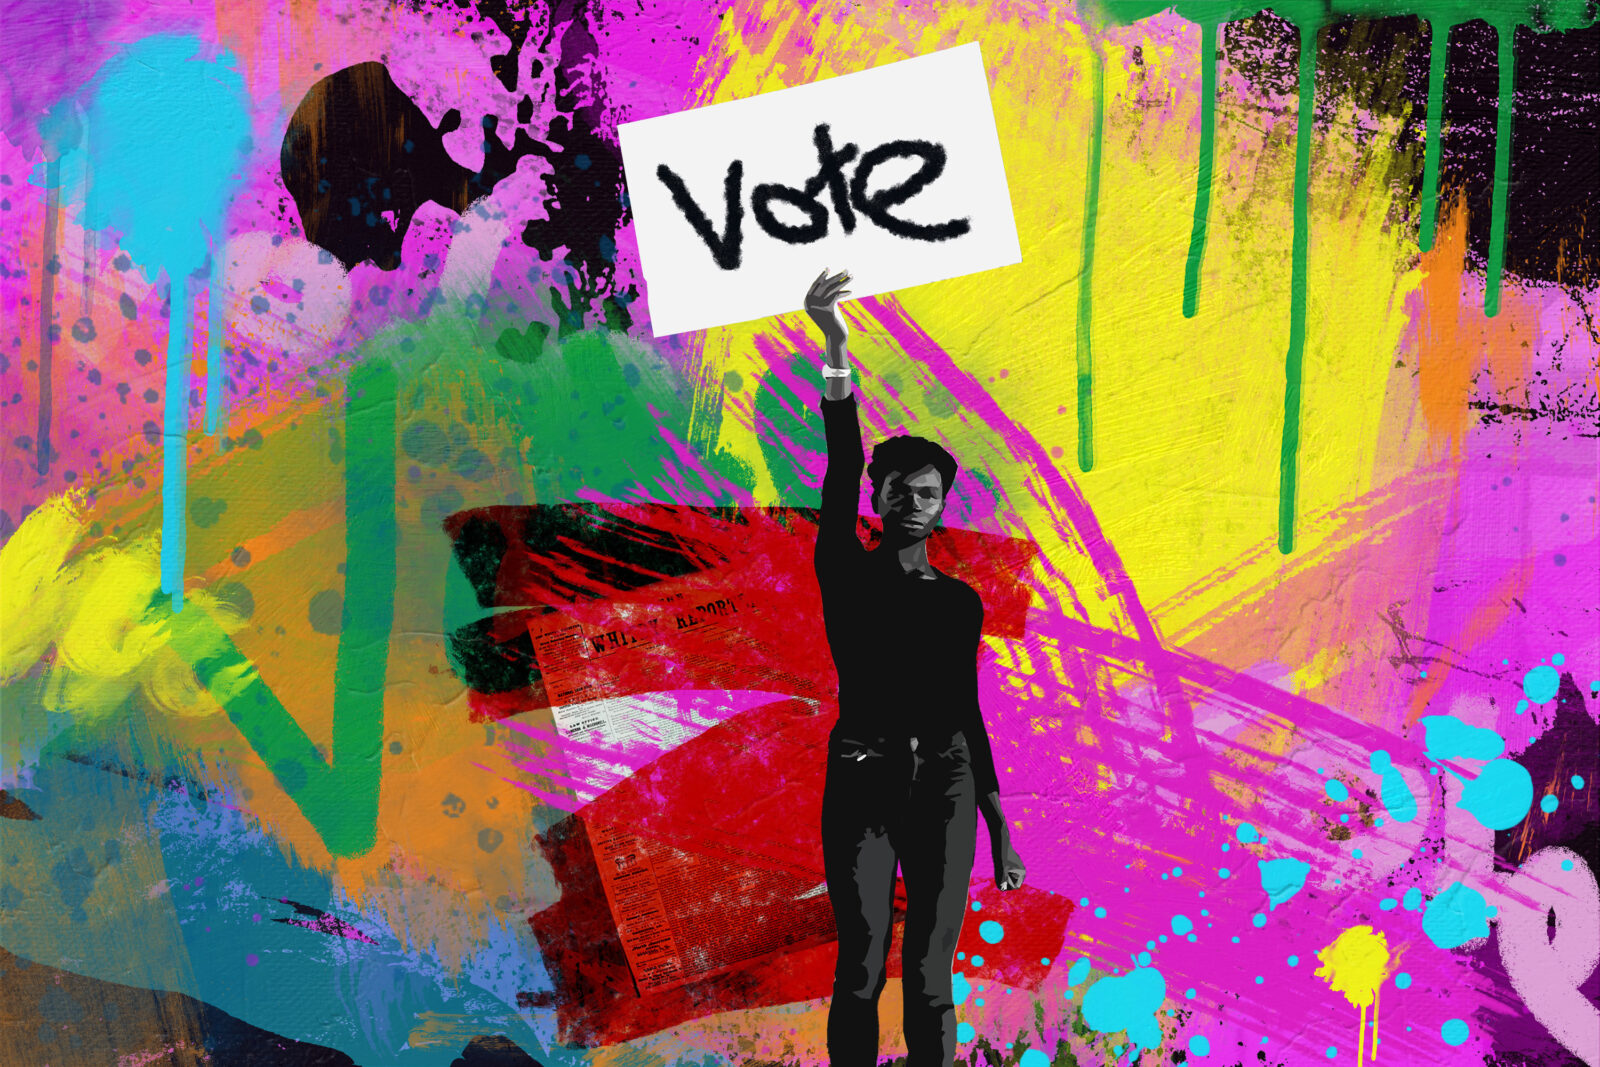 A cut-out image of a strong woman stands, holding a VOTE sign aloft above her head. The background of the piece is a cacophony of colours, etched and painted, sprayed and splattered across the canvas in the style of Mr. Brainwash.